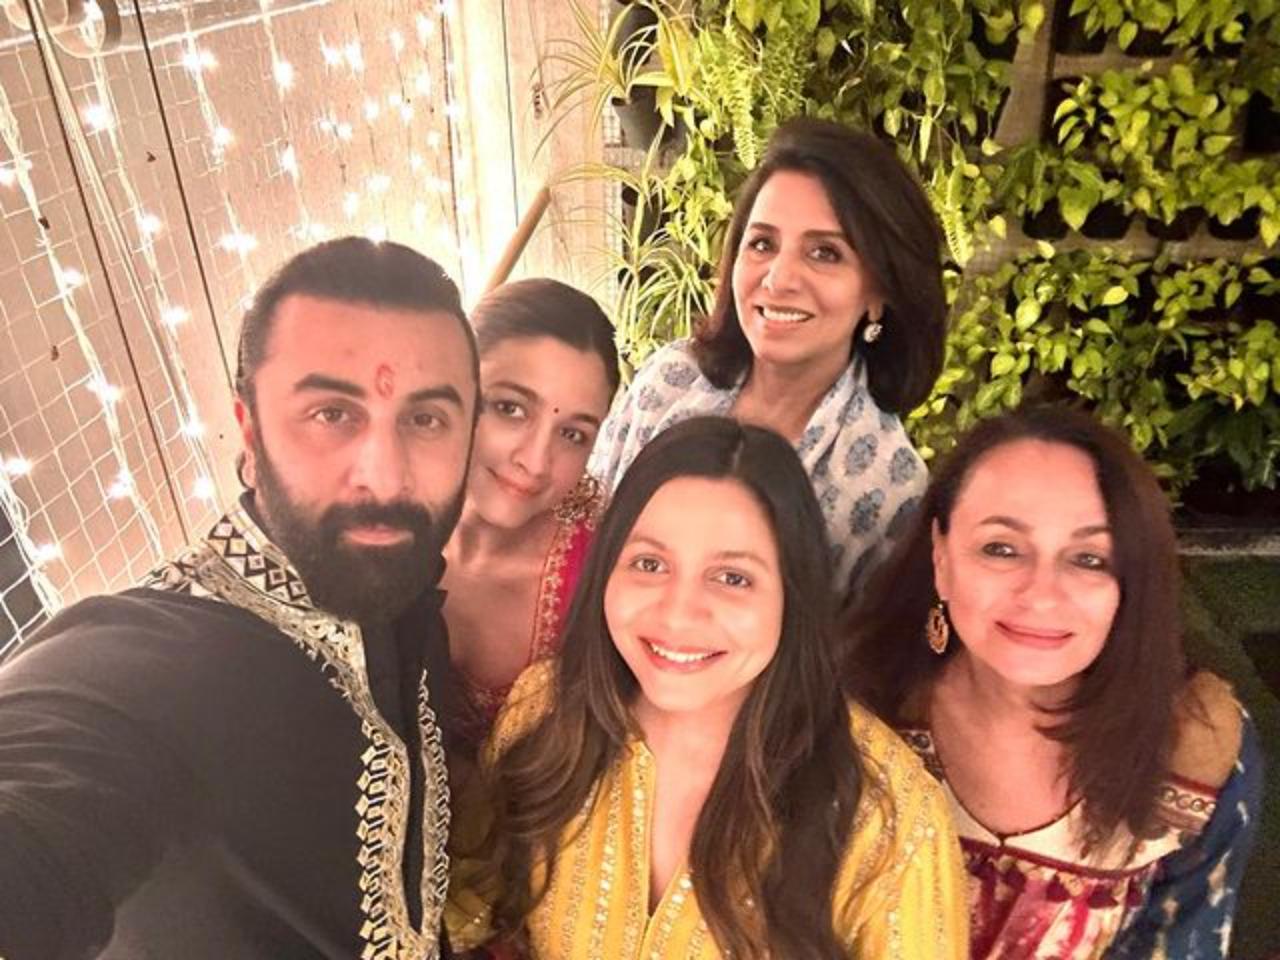 The pic shared by Neetu Kapoor is from the family's Diwali celebration